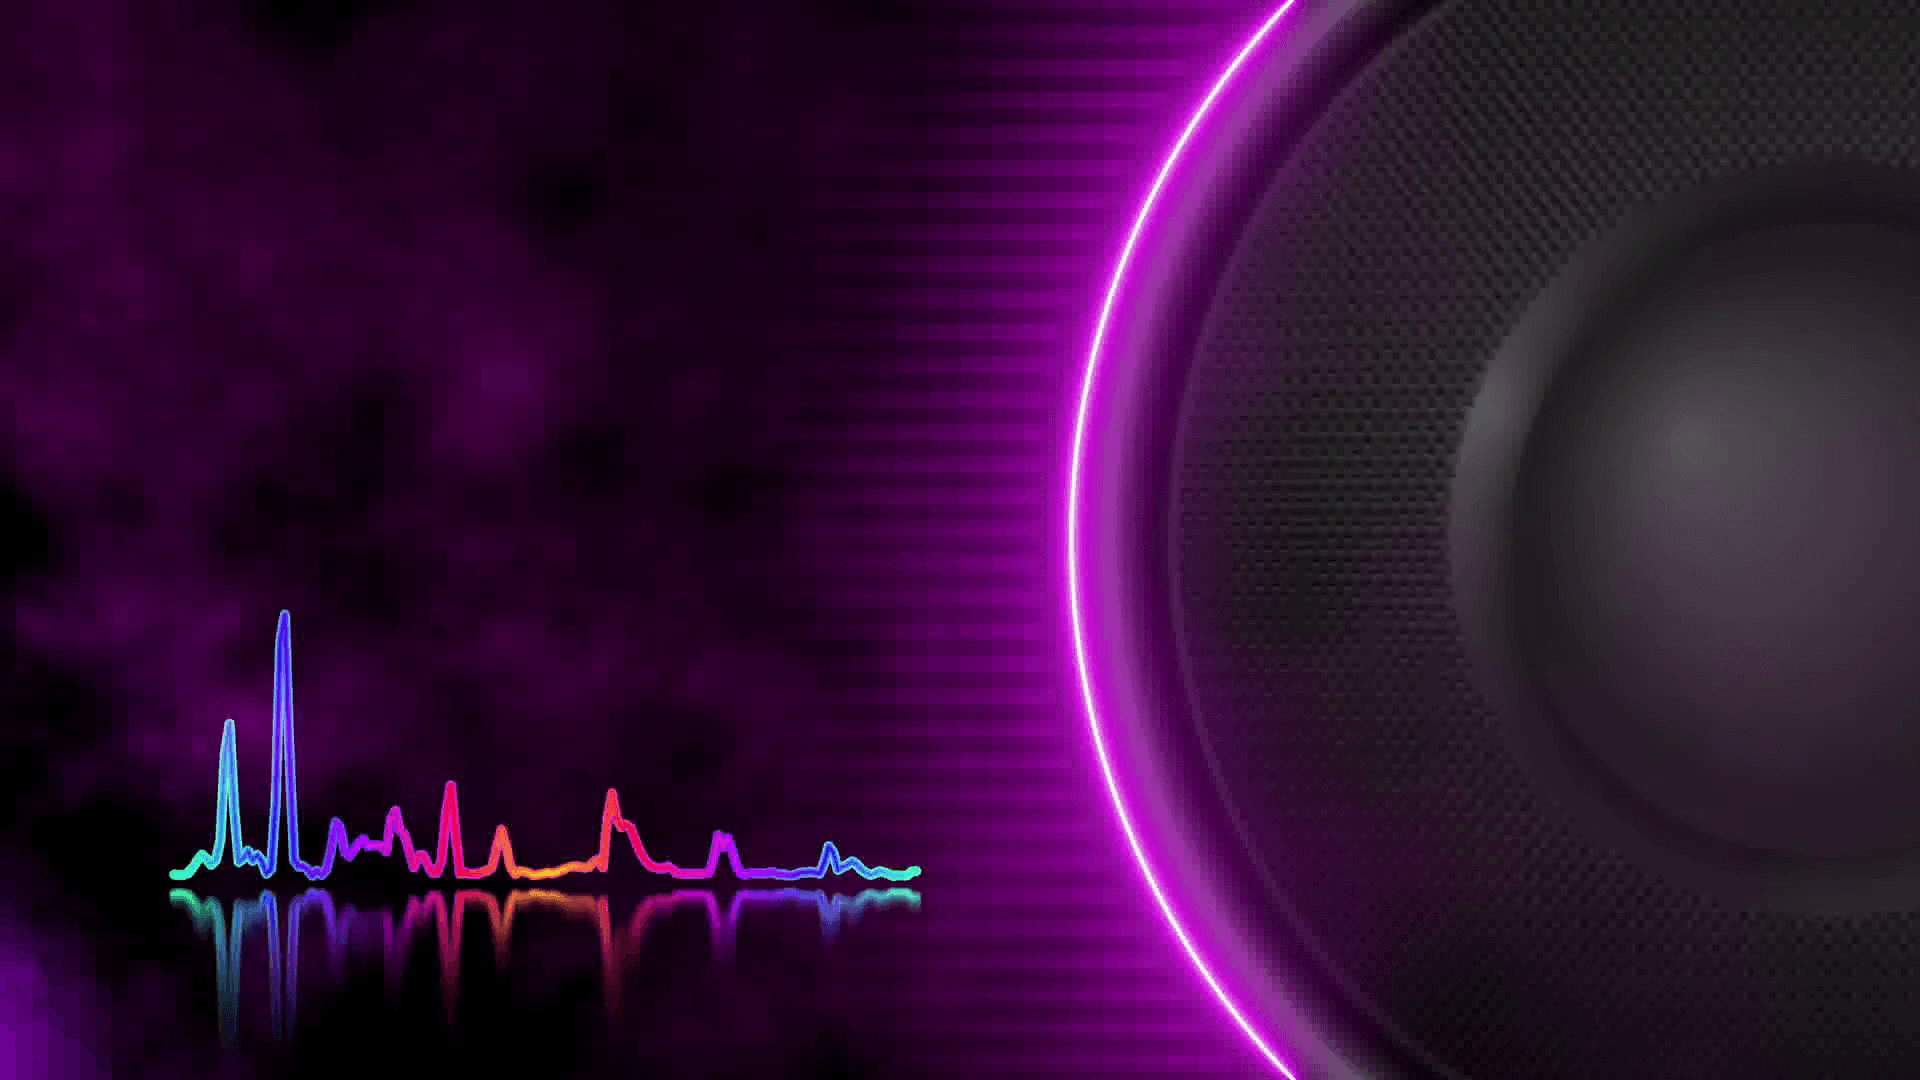 Speaker animation that plays low bass frequencies. Animated audio